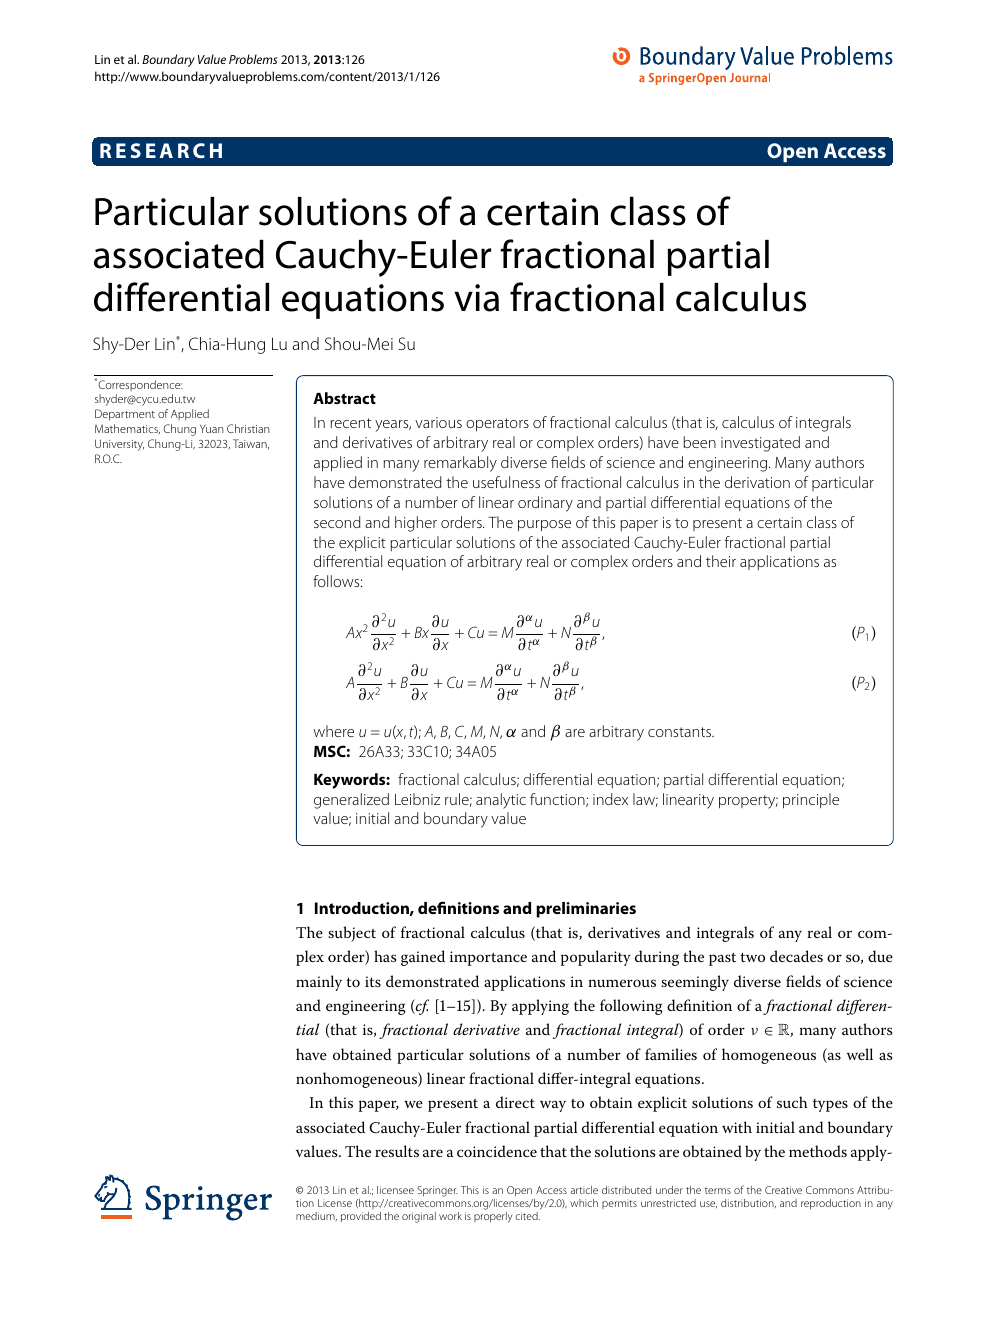 Particular Solutions Of A Certain Class Of Associated Cauchy Euler Fractional Partial Differential Equations Via Fractional Calculus Topic Of Research Paper In Mathematics Download Scholarly Article Pdf And Read For Free On